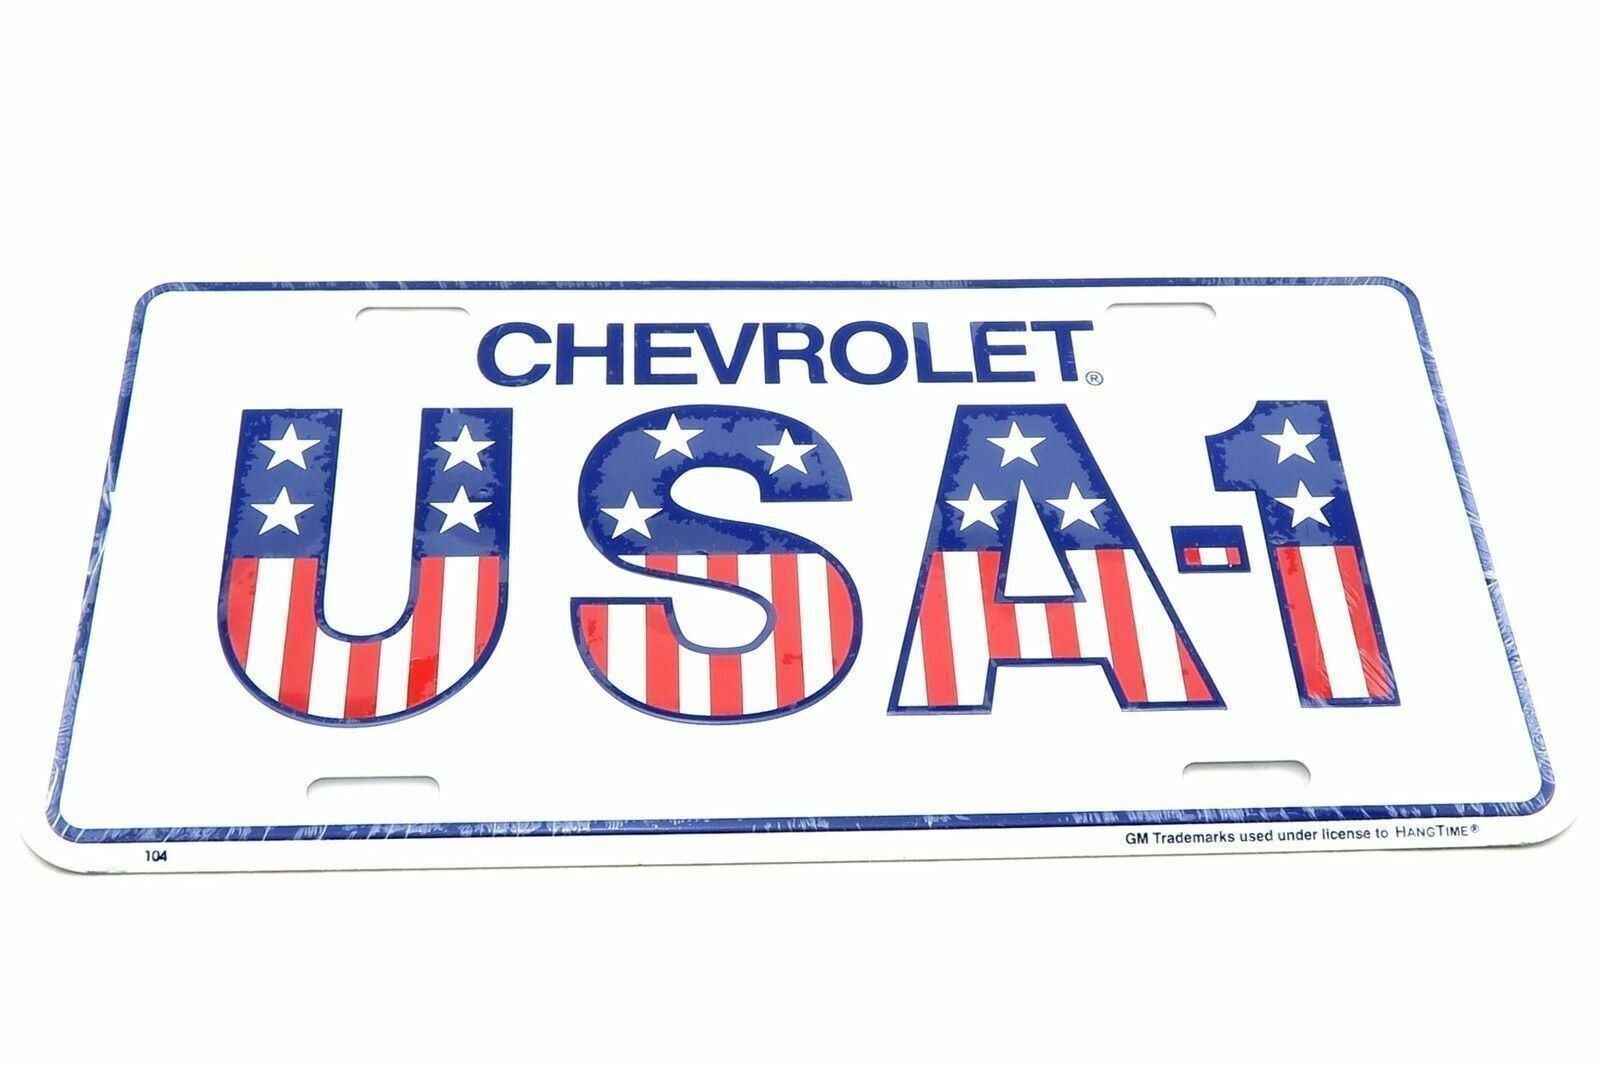 Chevrolet Chevy USA-1 Licensed Aluminum Metal License Plate Sign Tag